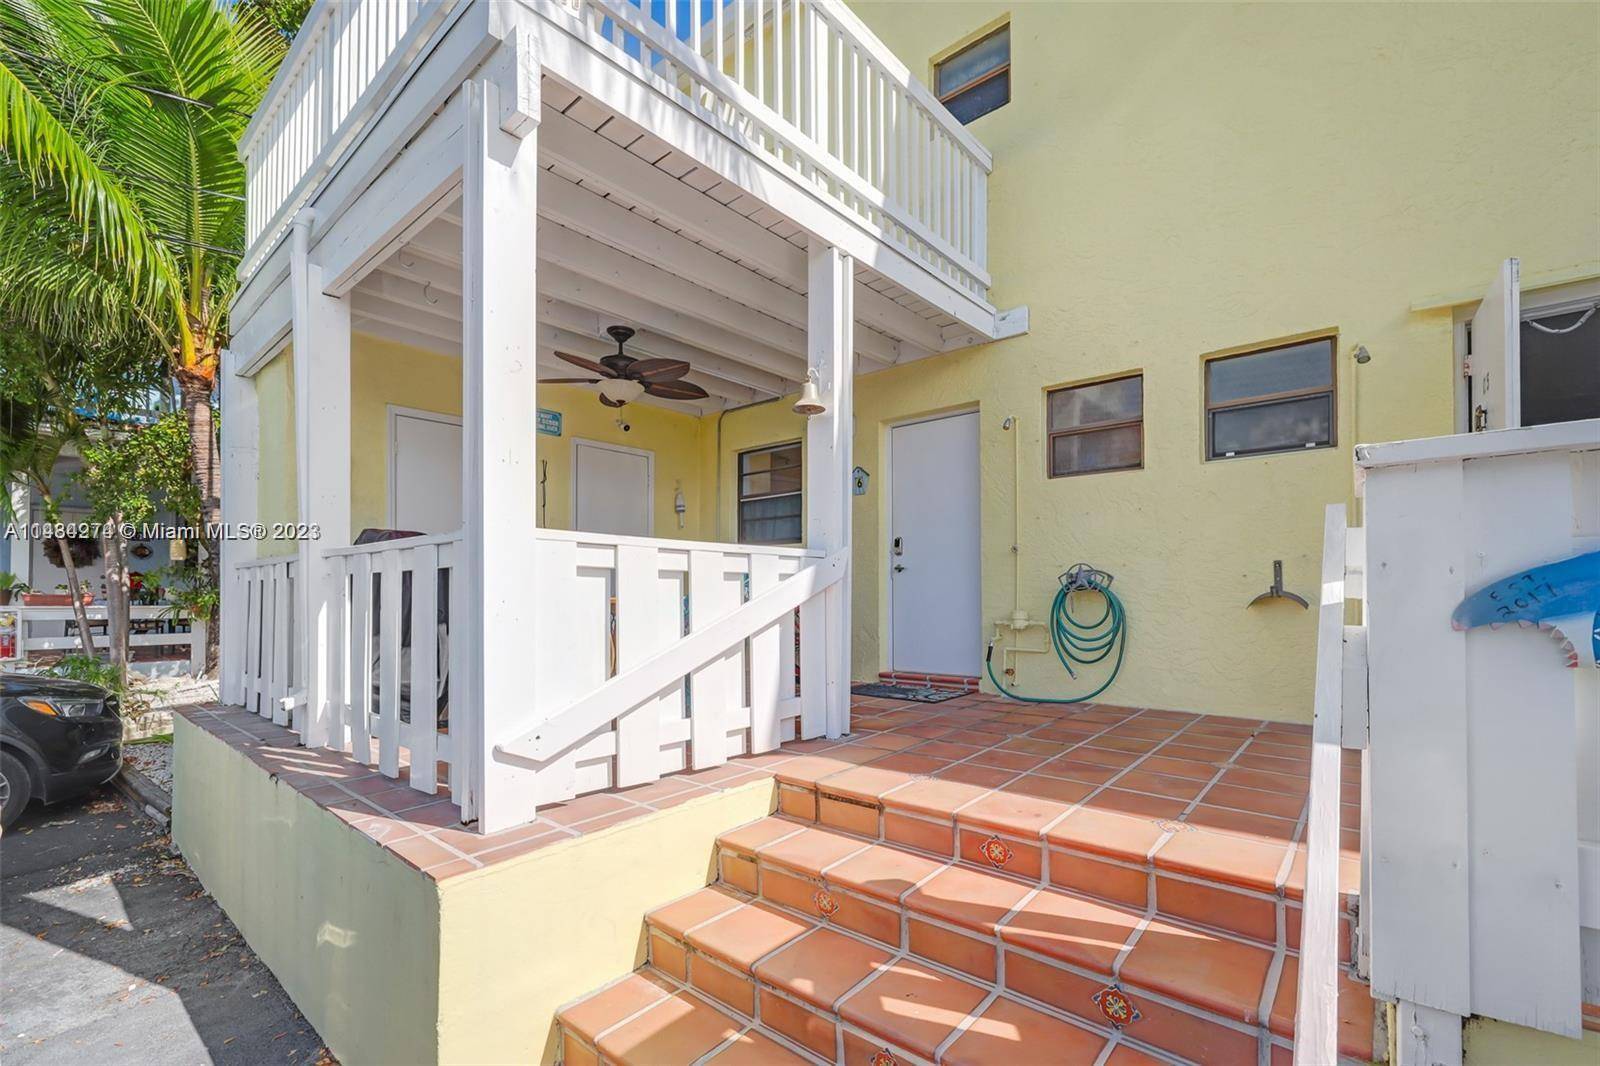 Salt Life in this Gorgeous 2 Bedroom 2 Bath corner unit Townhouse on the Ocean with amazing views of the Salt Water Lagoon and Mangrove.